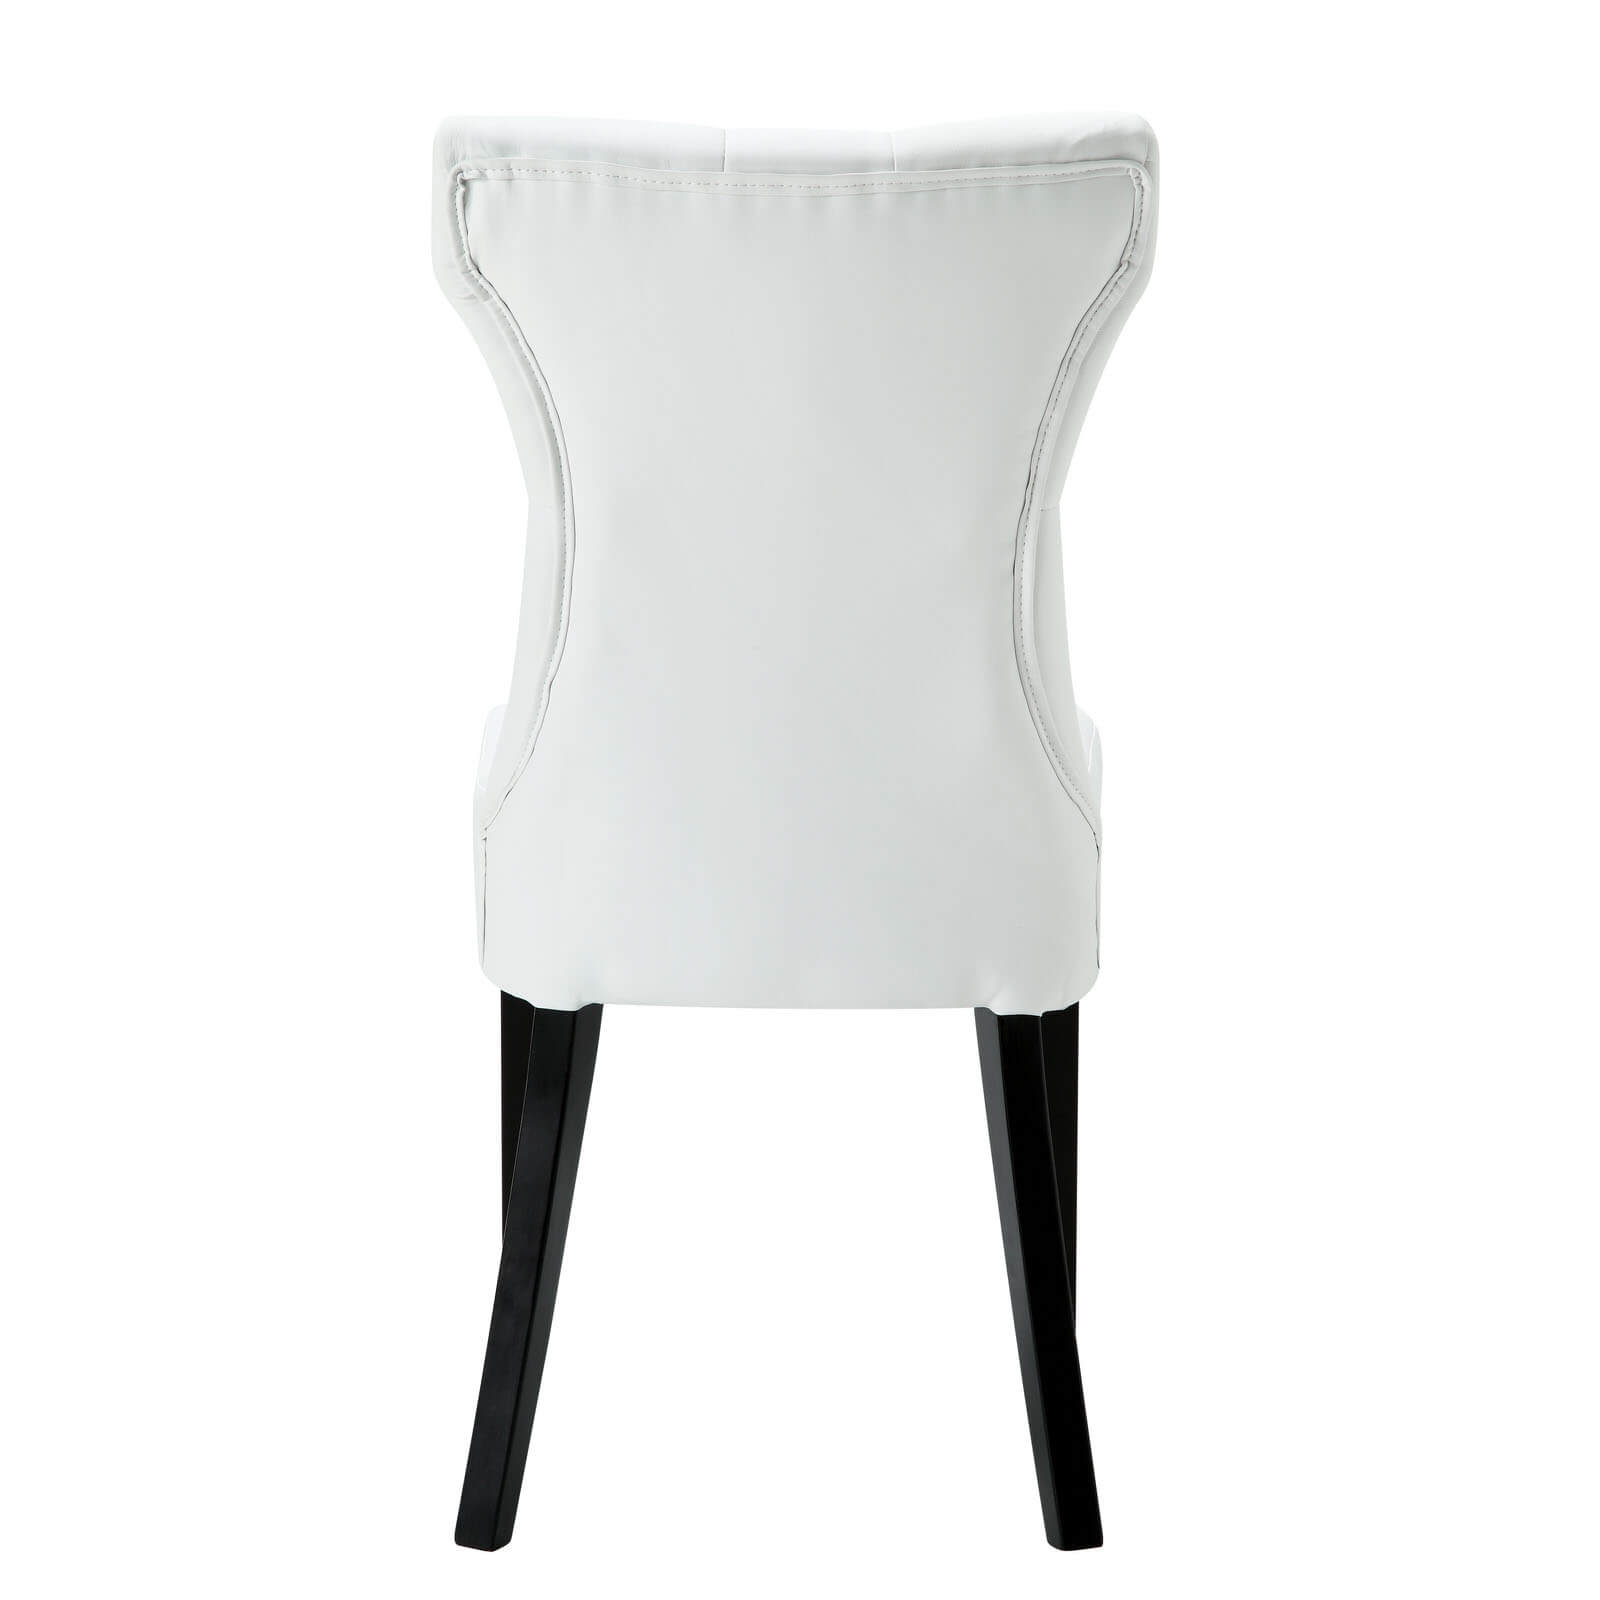 Dining upholstered chair back view